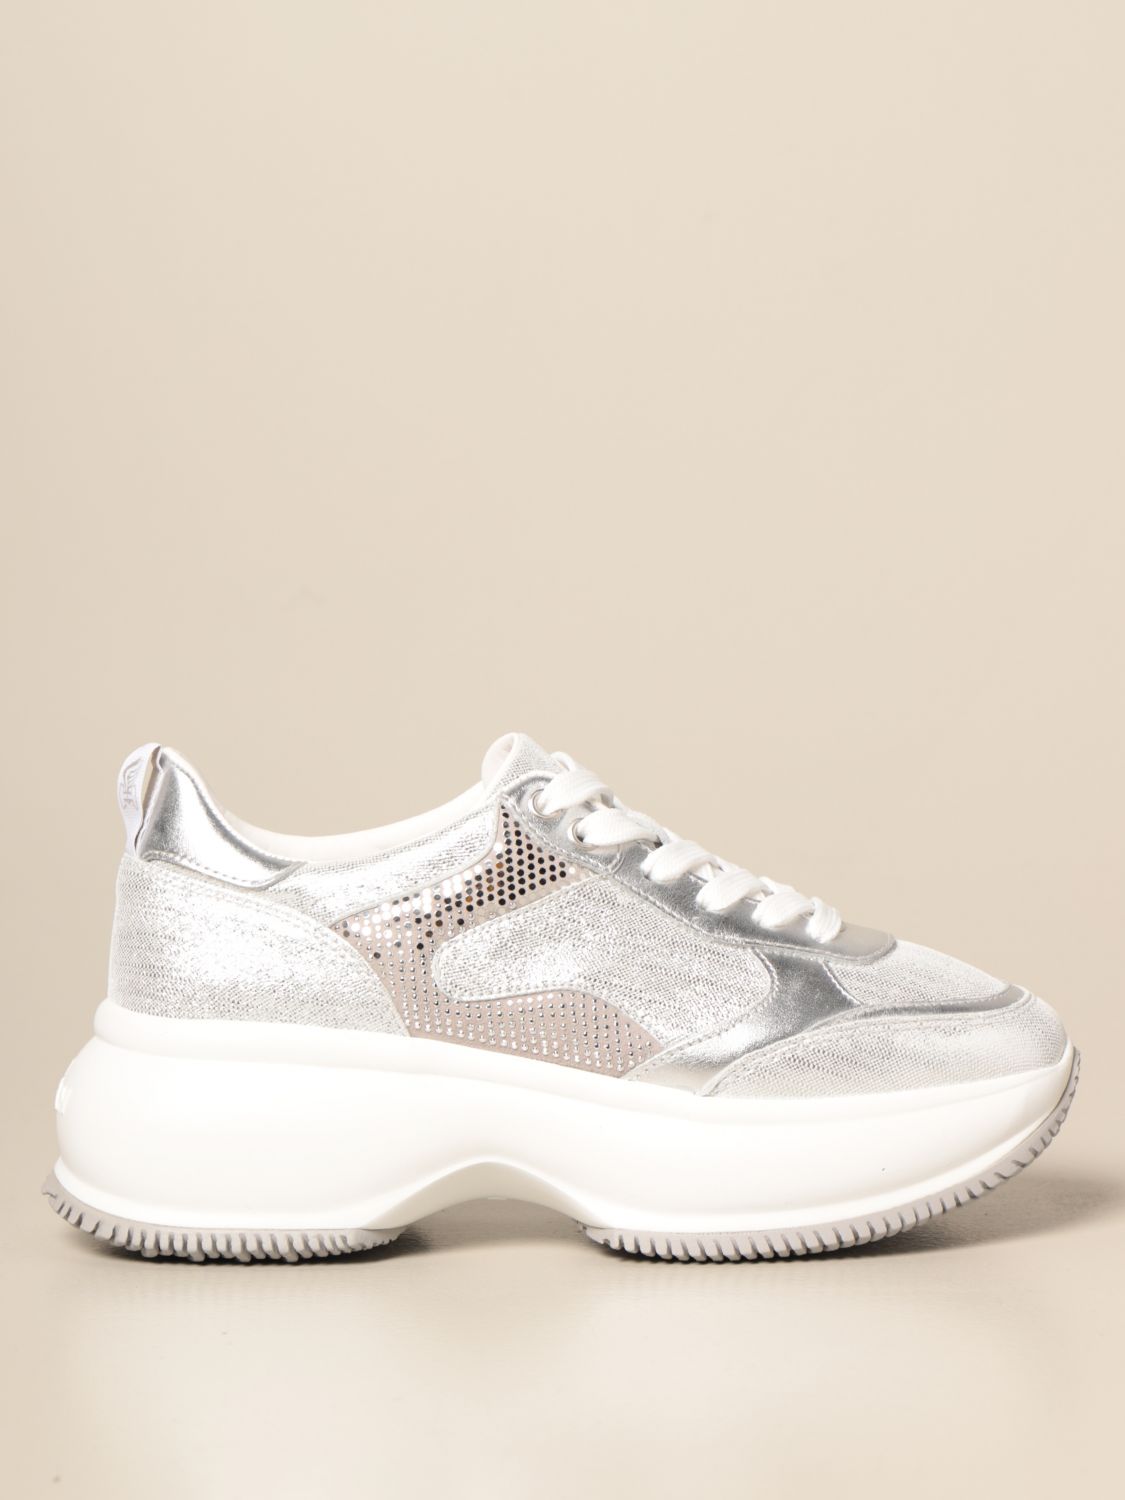 Schoolonderwijs september Concreet Hogan Outlet: Maxi I Active sneakers in laminated leather and degradé  fabric - Silver | Hogan sneakers HXW4350DM00 PDO online on GIGLIO.COM